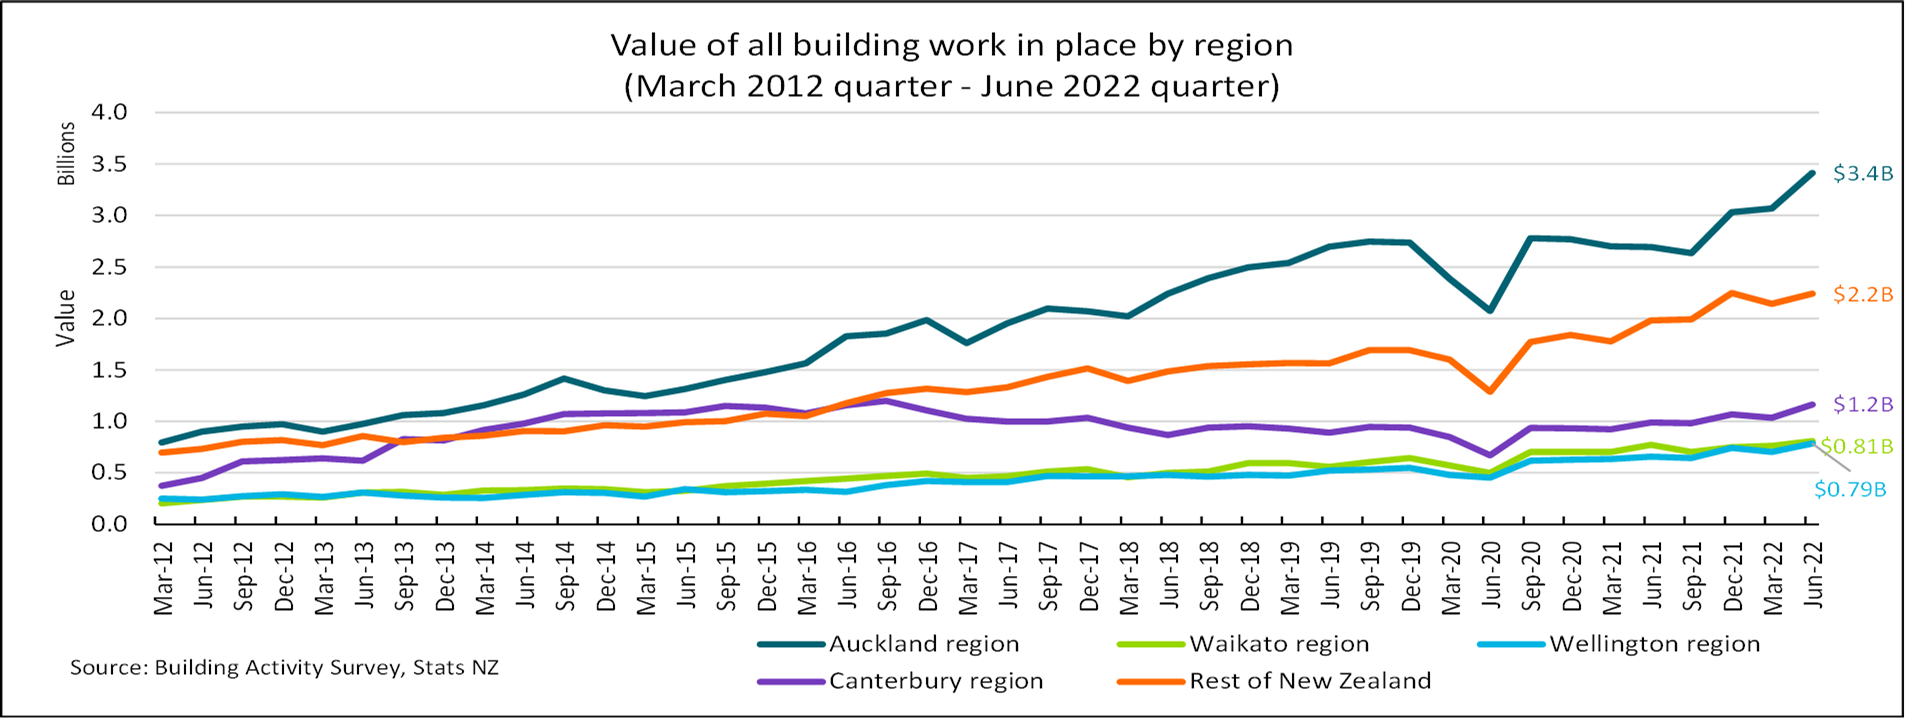 Line graph of value of building work in place by region.